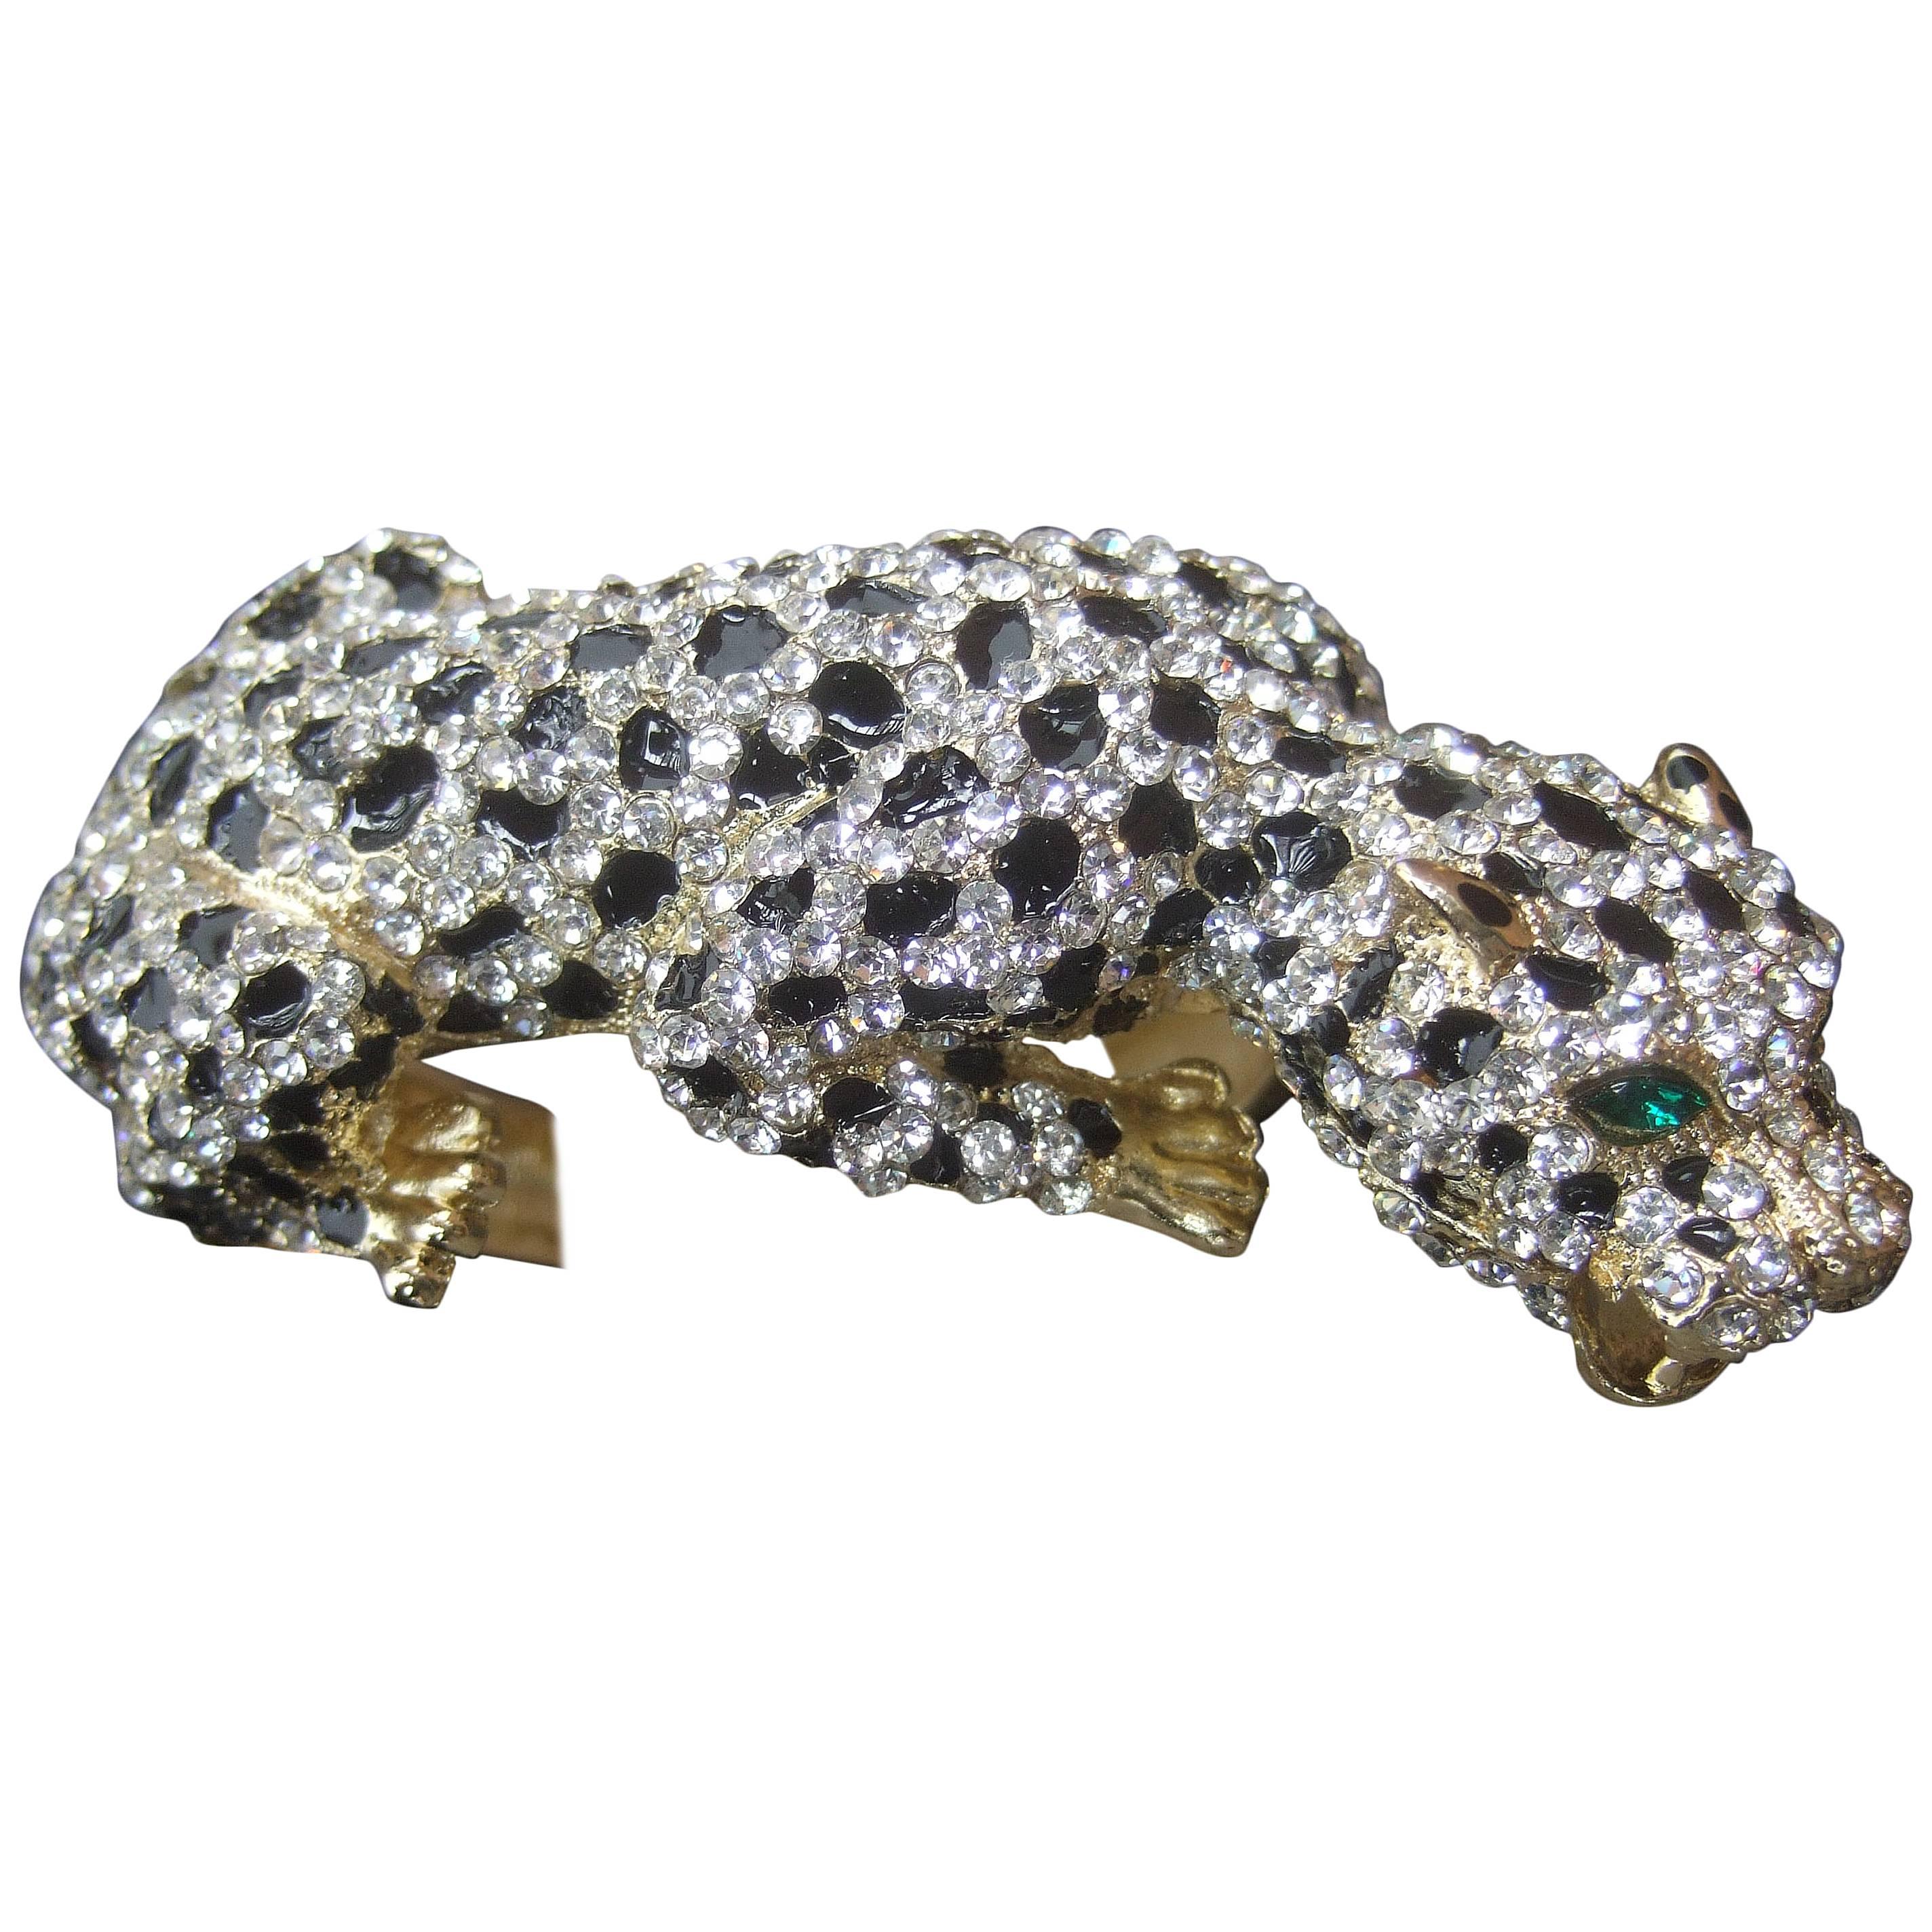 Sleek crystal encrusted enamel panther bracelet 
The hinged bracelet is designed with an exotic
jeweled panther

The felines body is embellished with glittering
diamante crystals and black enamel spots
The eyes are embedded with emerald